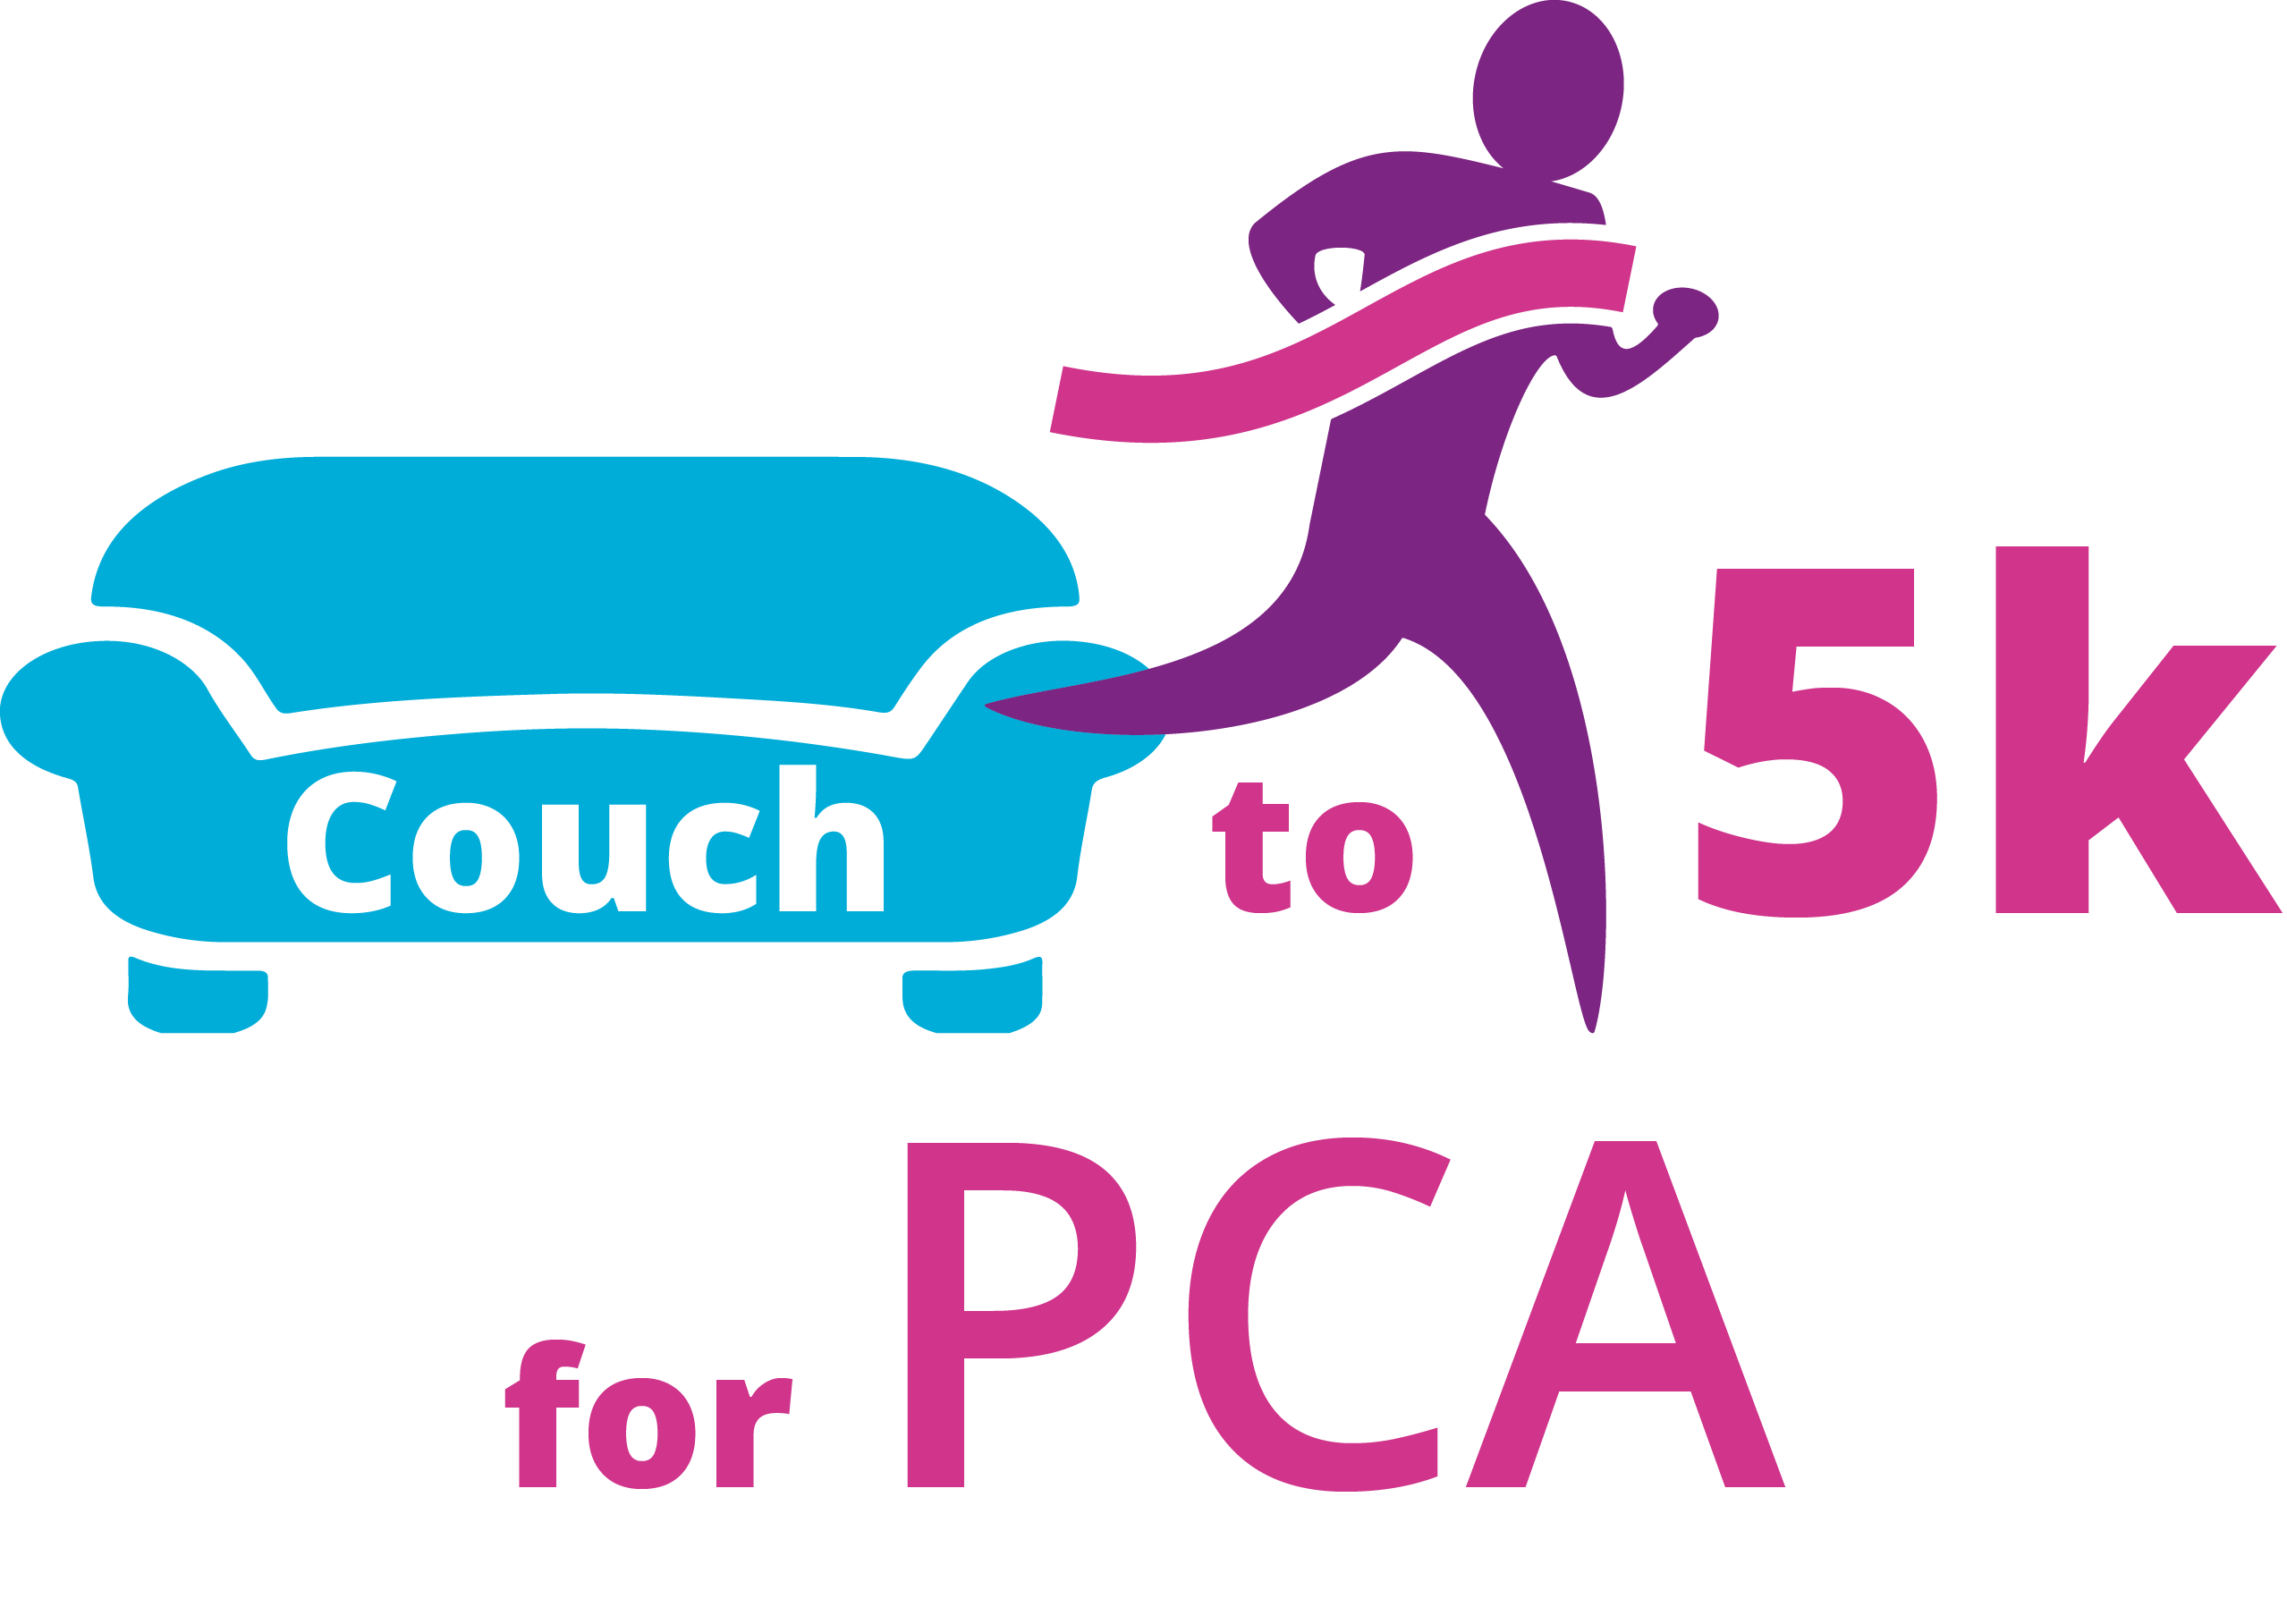 Couch Logo - Couch to 5k logo · Pancreatic Cancer Action